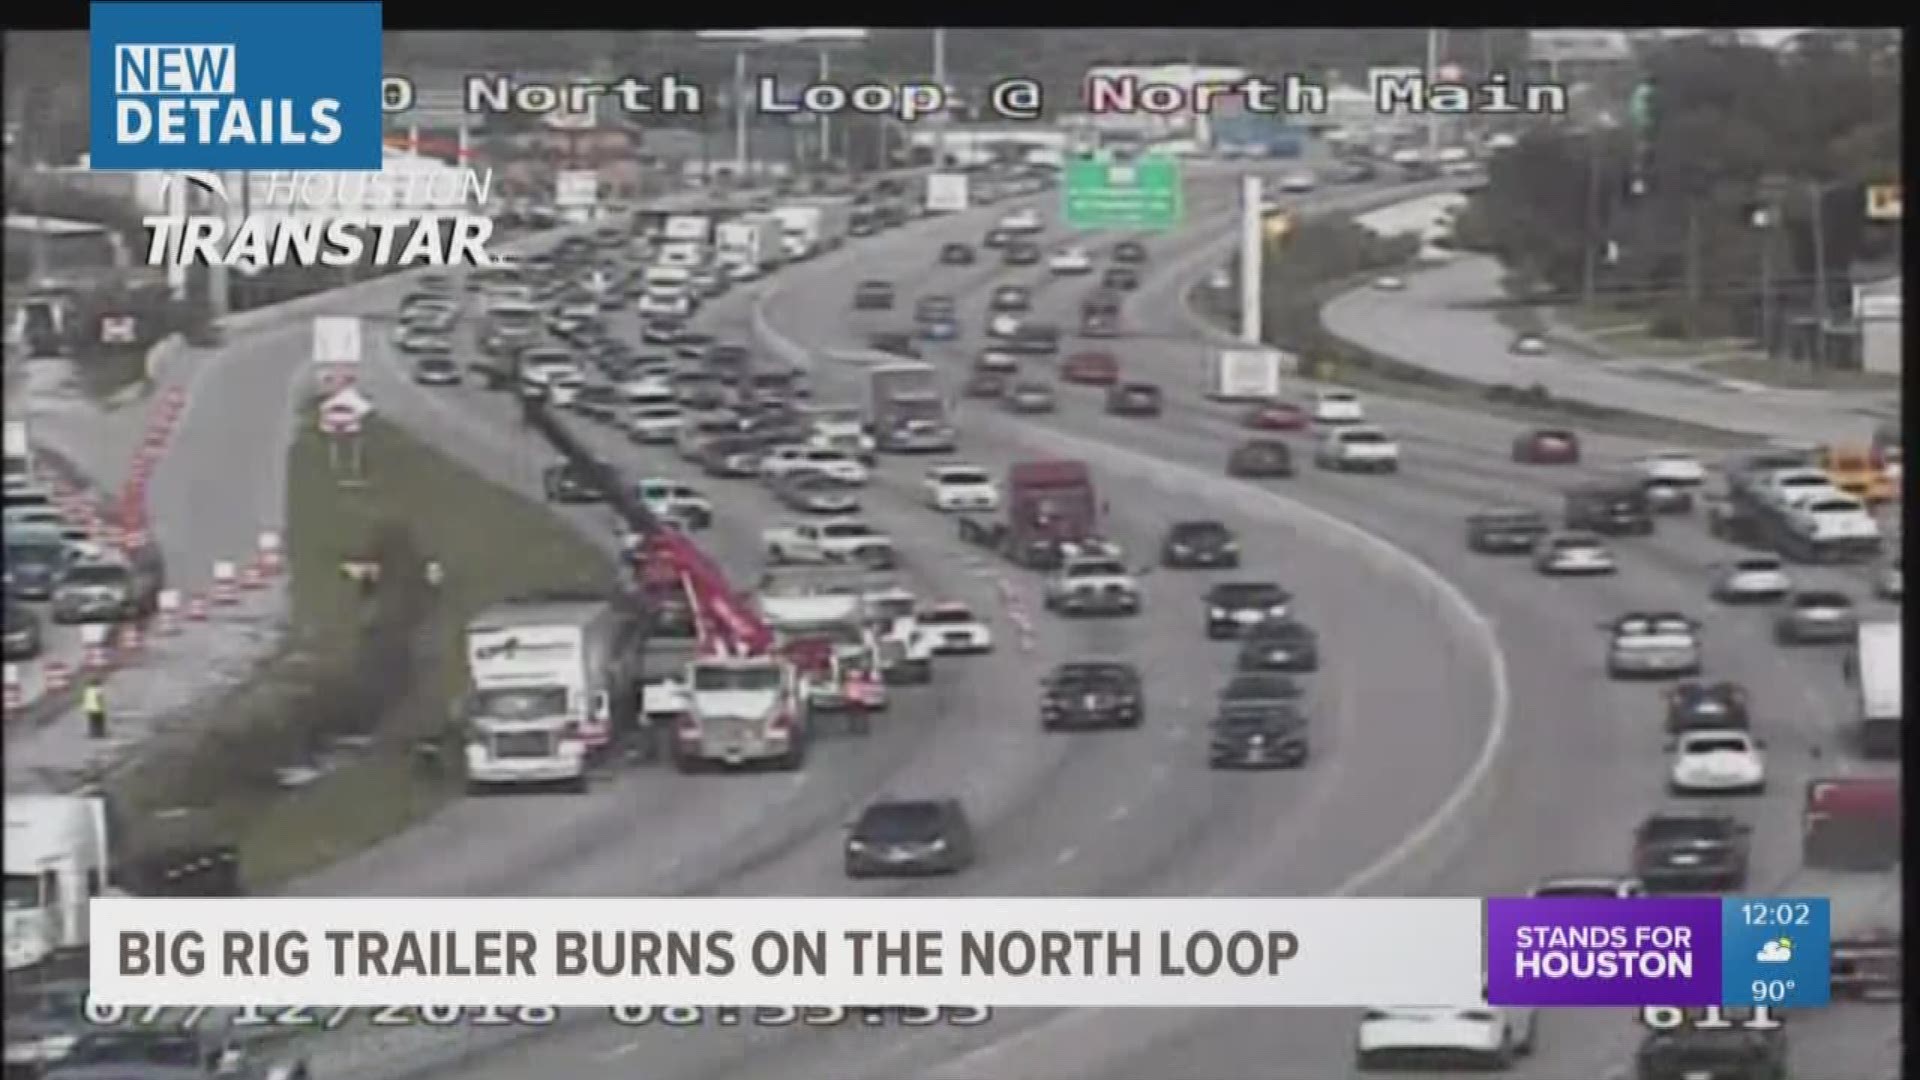 An 18 wheeler caught fire on the North Loop and caused a major traffic jam for hours early Thursday morning. 